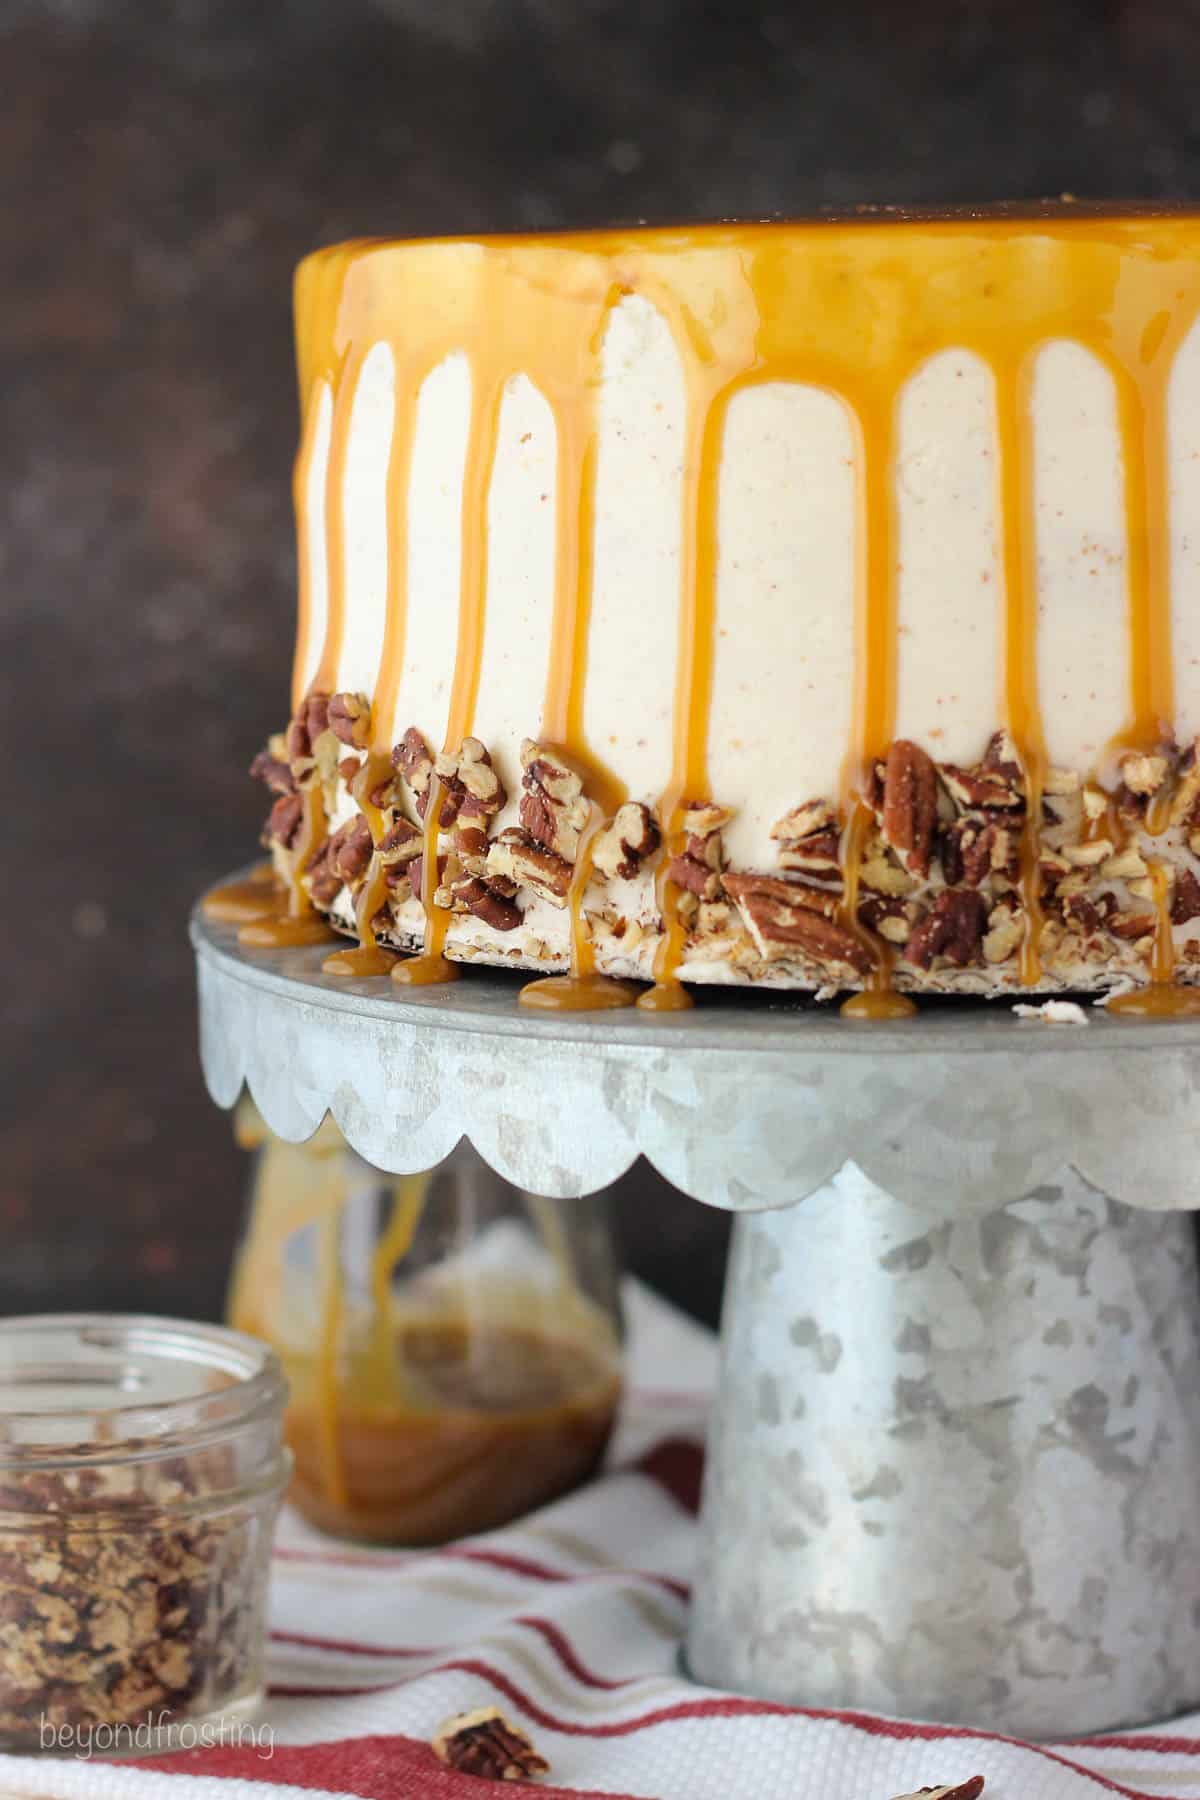 Salted Caramel Butterscotch cake on a cake stand